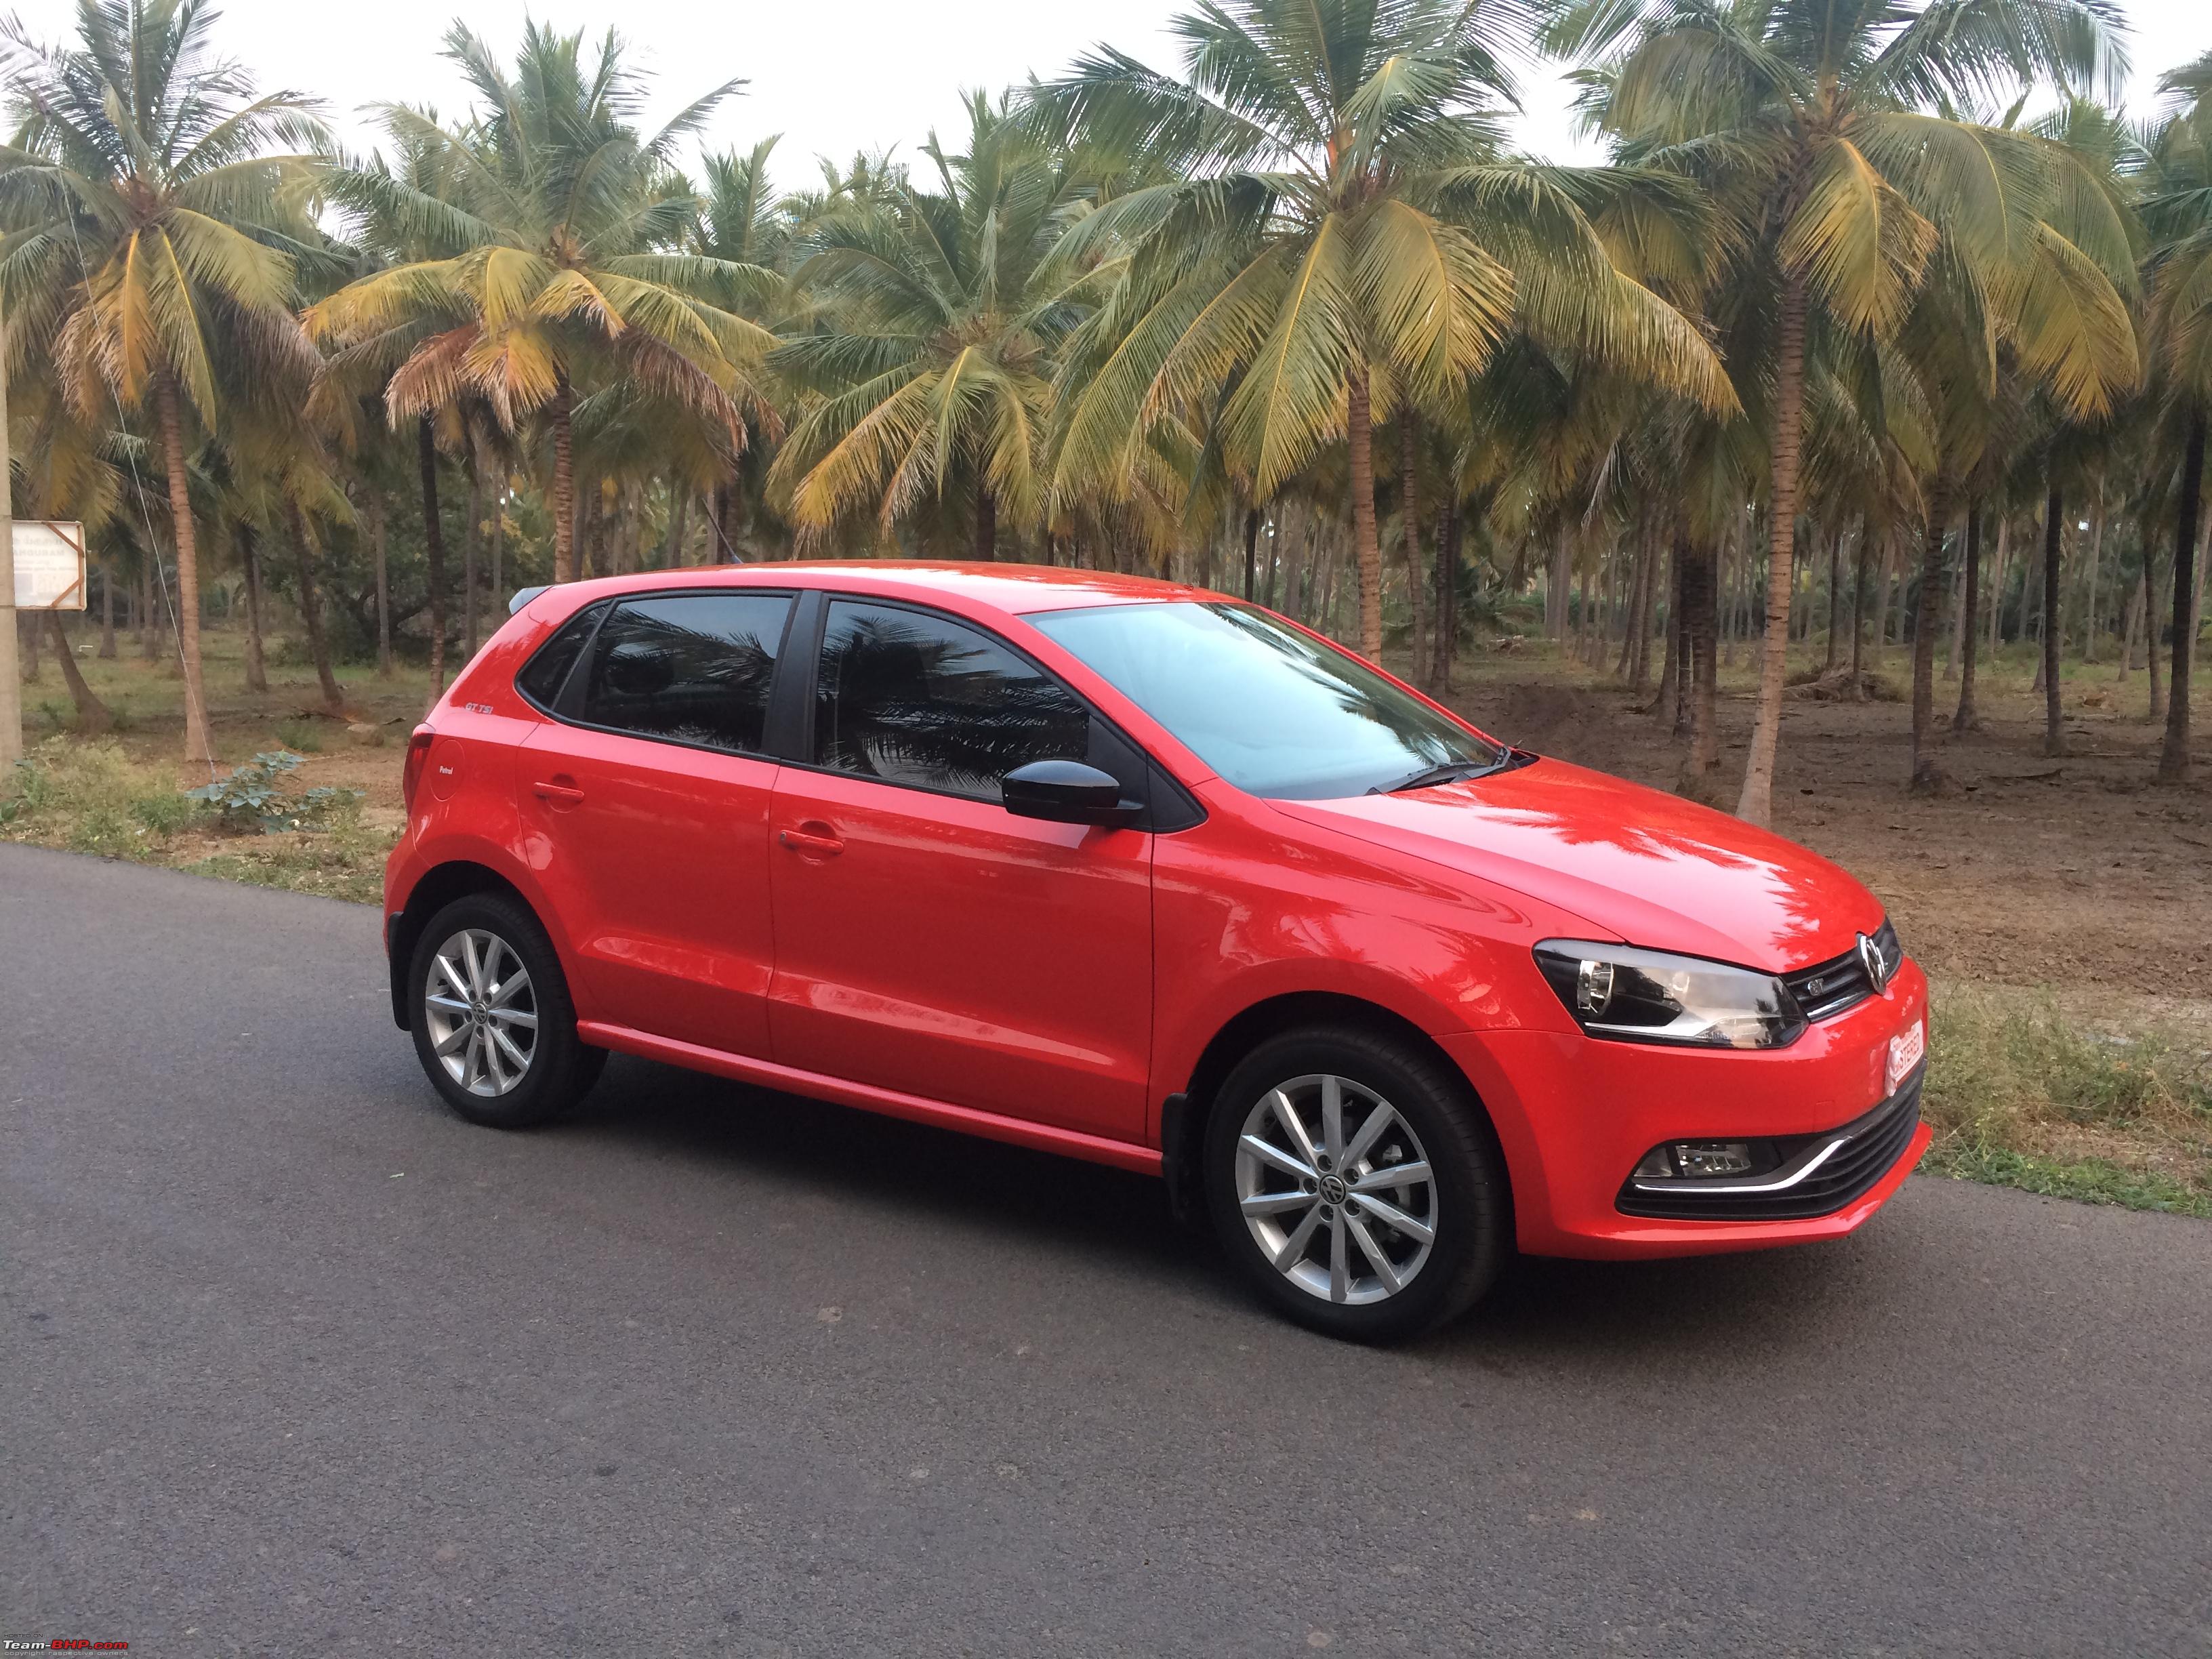 Volkswagen Polo 1.2L GT TSI : Official Review - Page 340 - Team-BHP